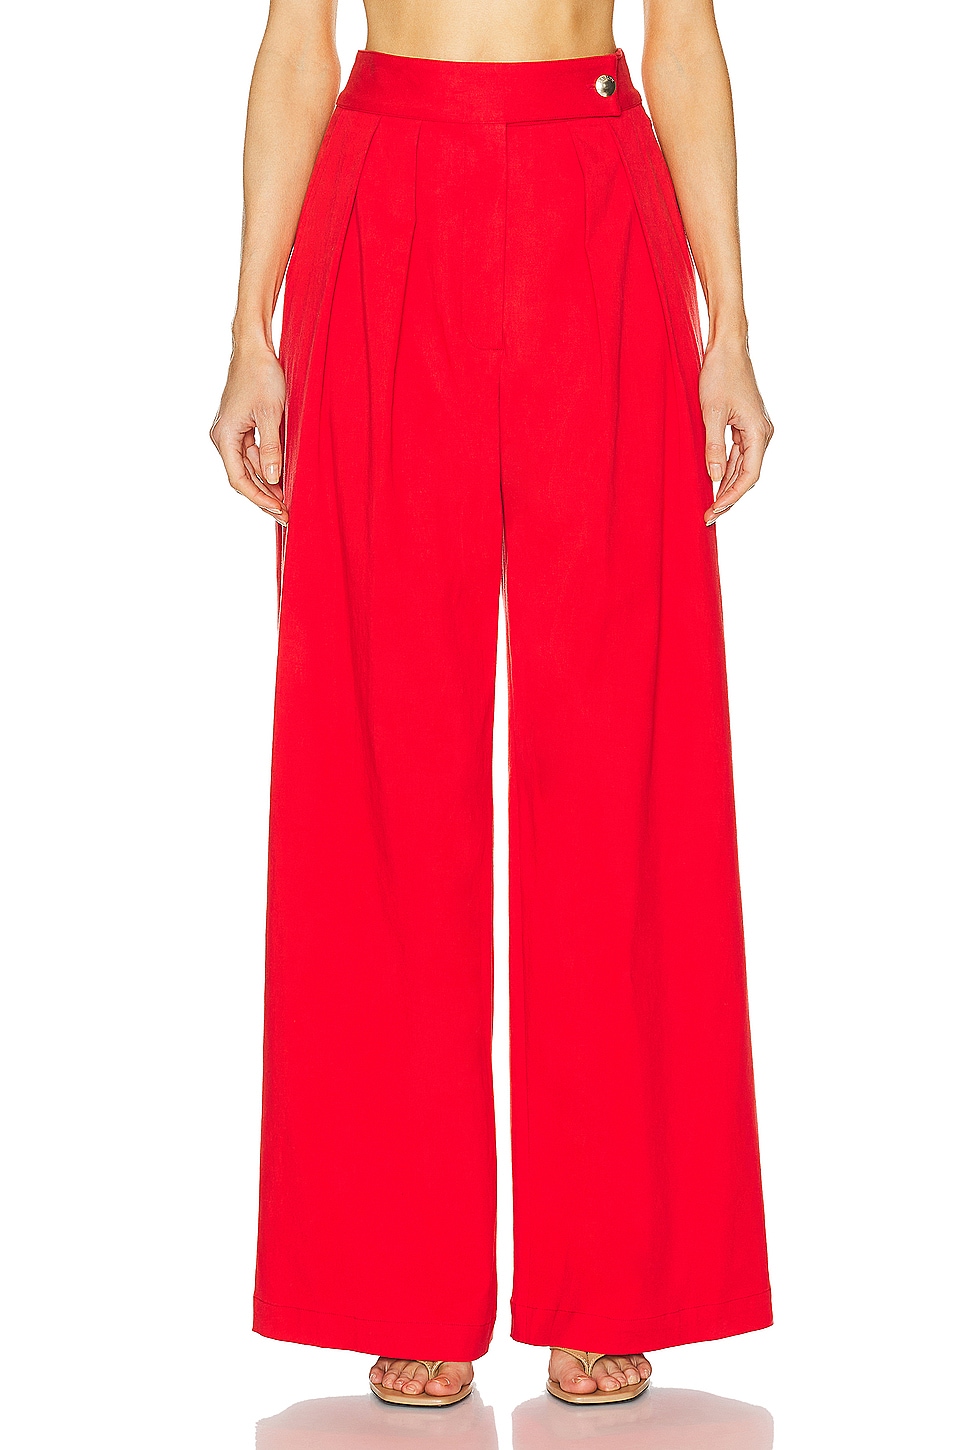 Brooklyn Twill Pant in Red